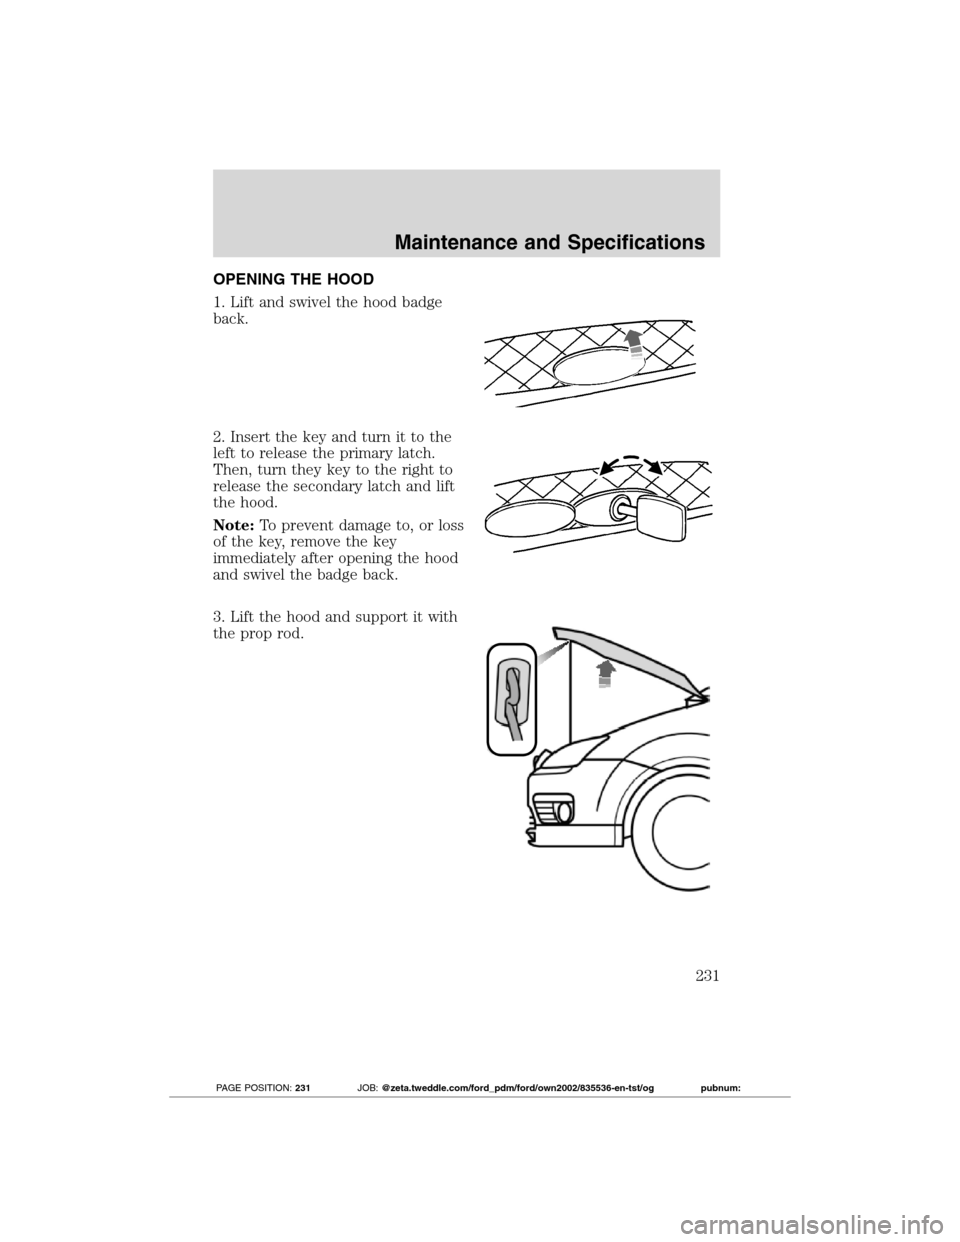 FORD TRANSIT CONNECT 2012 1.G Owners Manual OPENING THE HOOD
1. Lift and swivel the hood badge
back.
2. Insert the key and turn it to the
left to release the primary latch.
Then, turn they key to the right to
release the secondary latch and lif